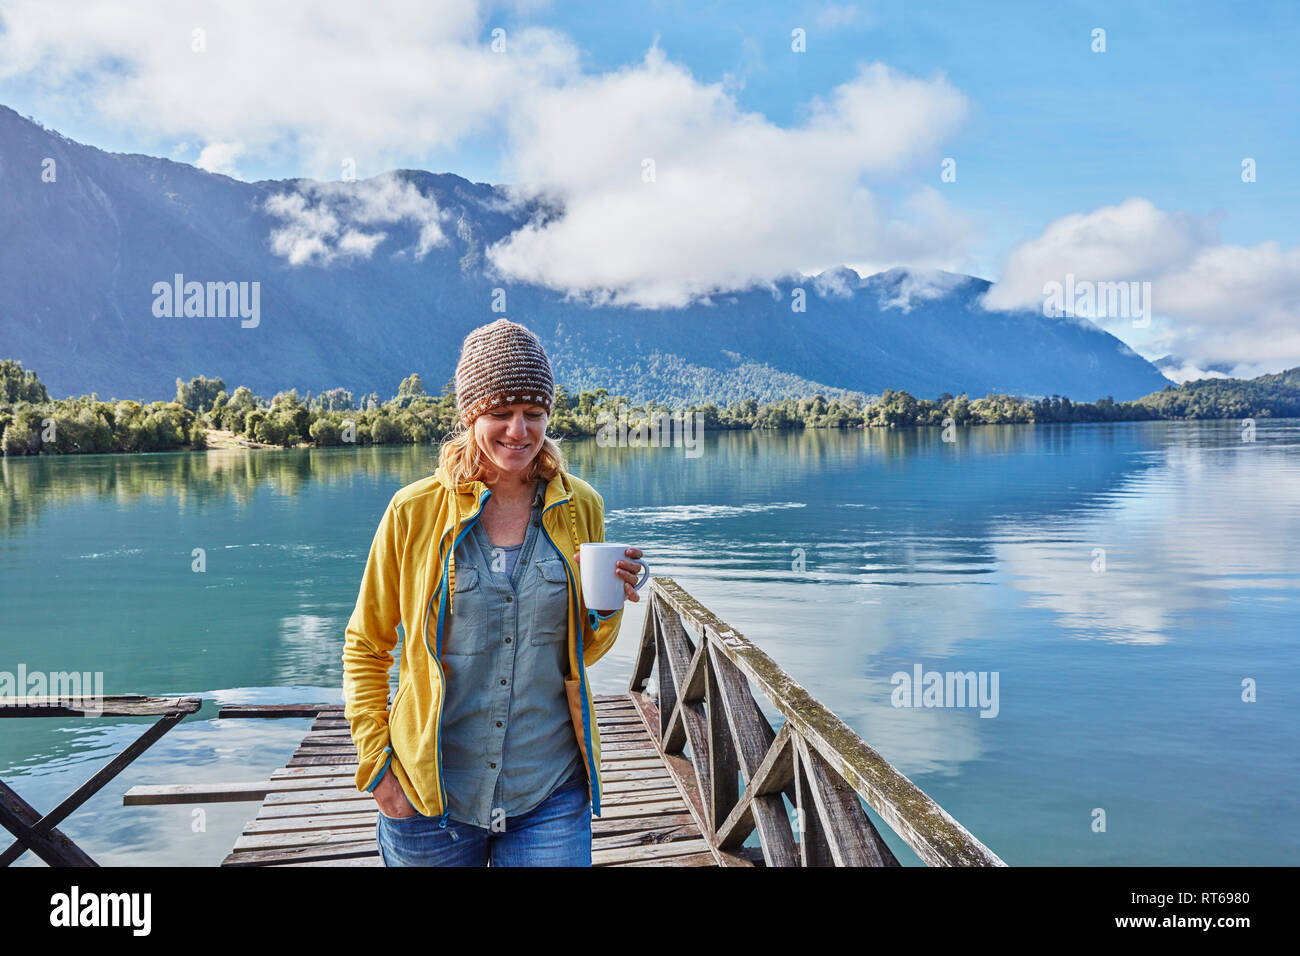 Chili, Lago Rosselot, Chaiten, woman walking on jetty holding mug Banque D'Images